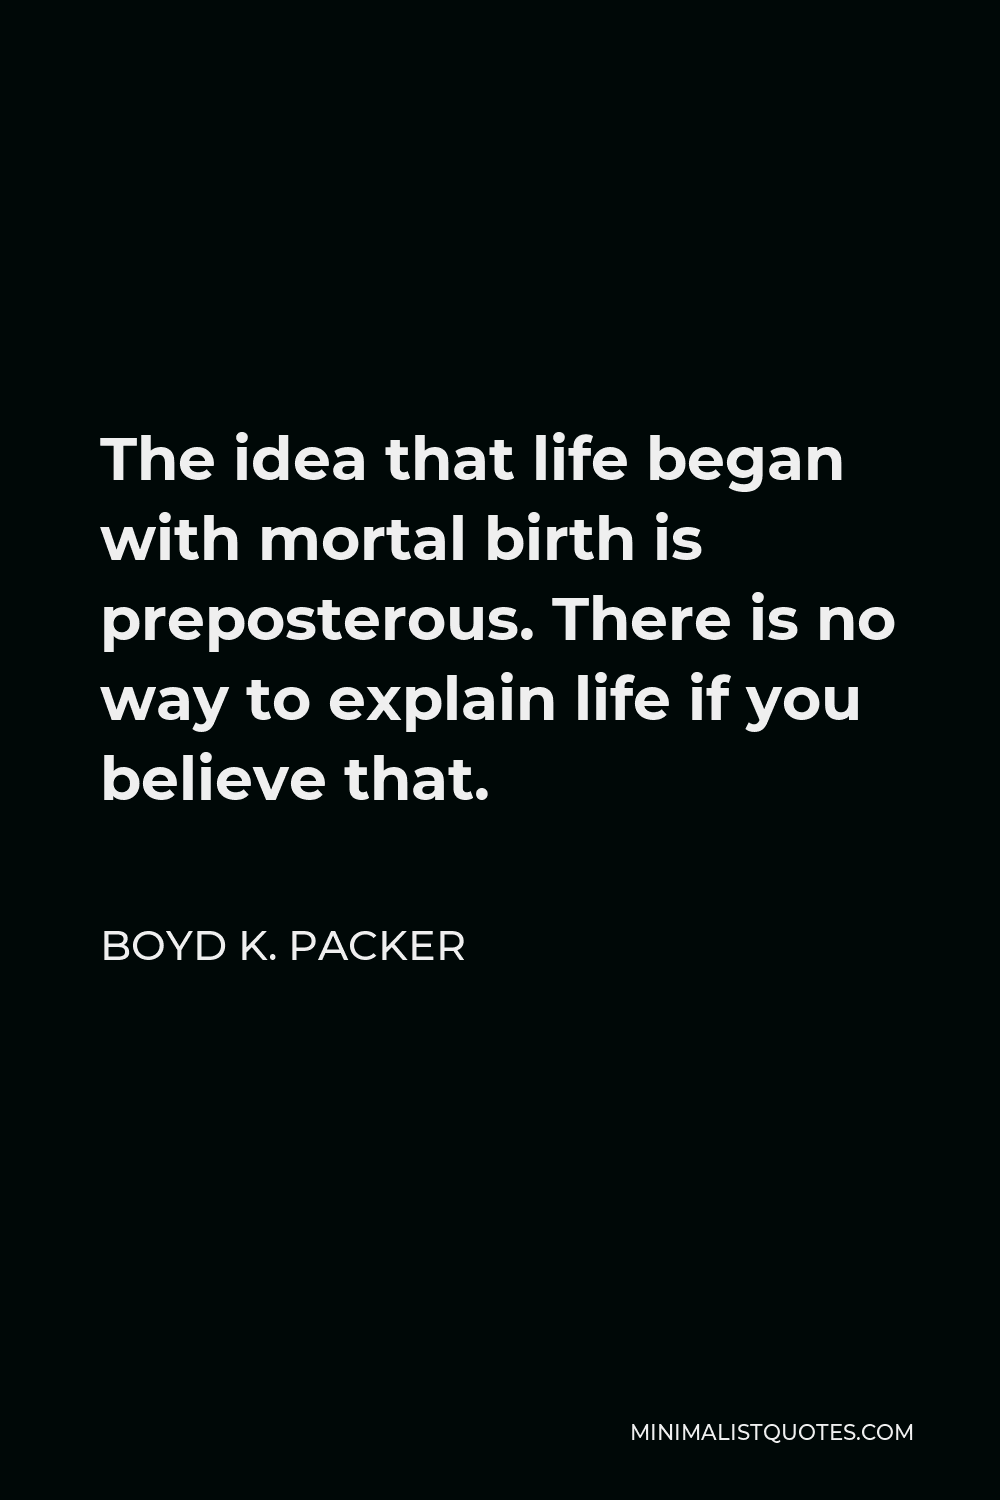 Boyd K. Packer Quote - The idea that life began with mortal birth is preposterous. There is no way to explain life if you believe that.